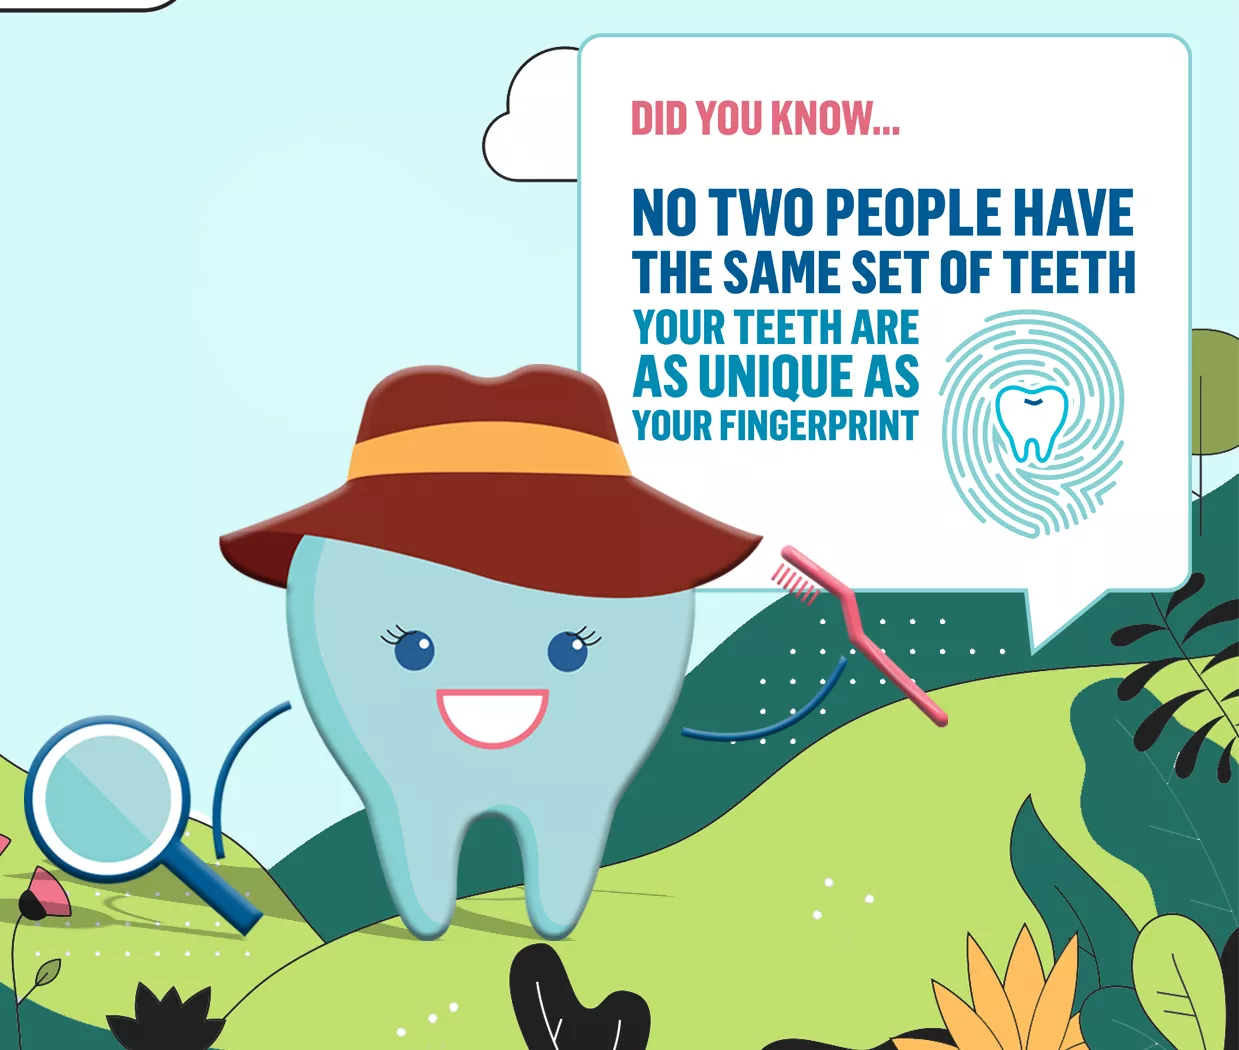 Did you know no two people have the same set of teeth? Your teeth are as unique as your fingerprint!